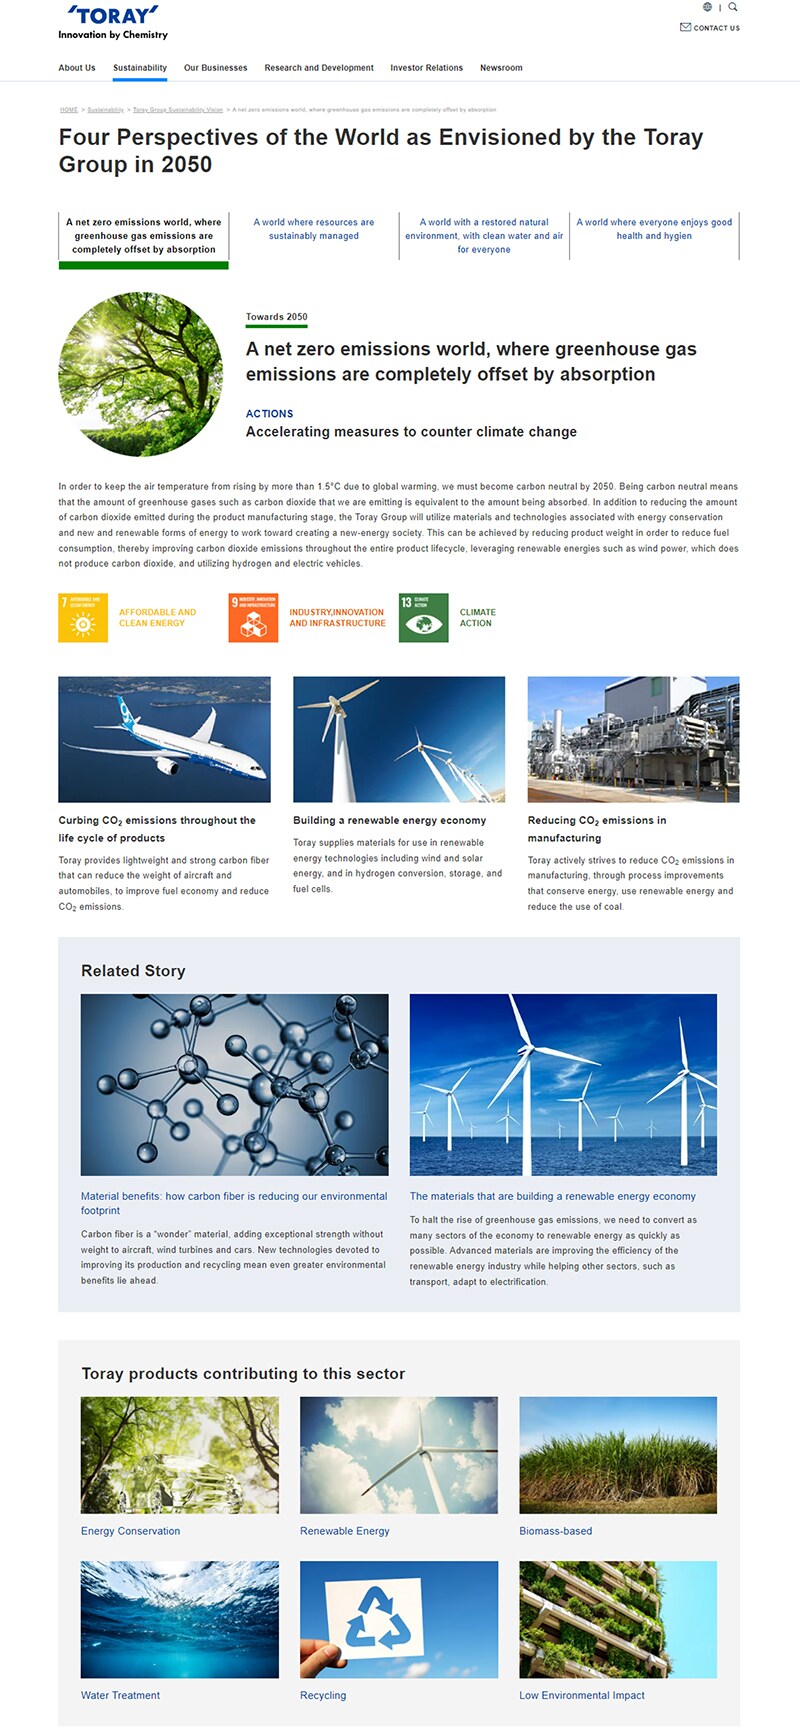 A net zero emissions world section of the Four Perspectives of the World as Envisioned by the Toray Group in 2050 page of the Toray website.